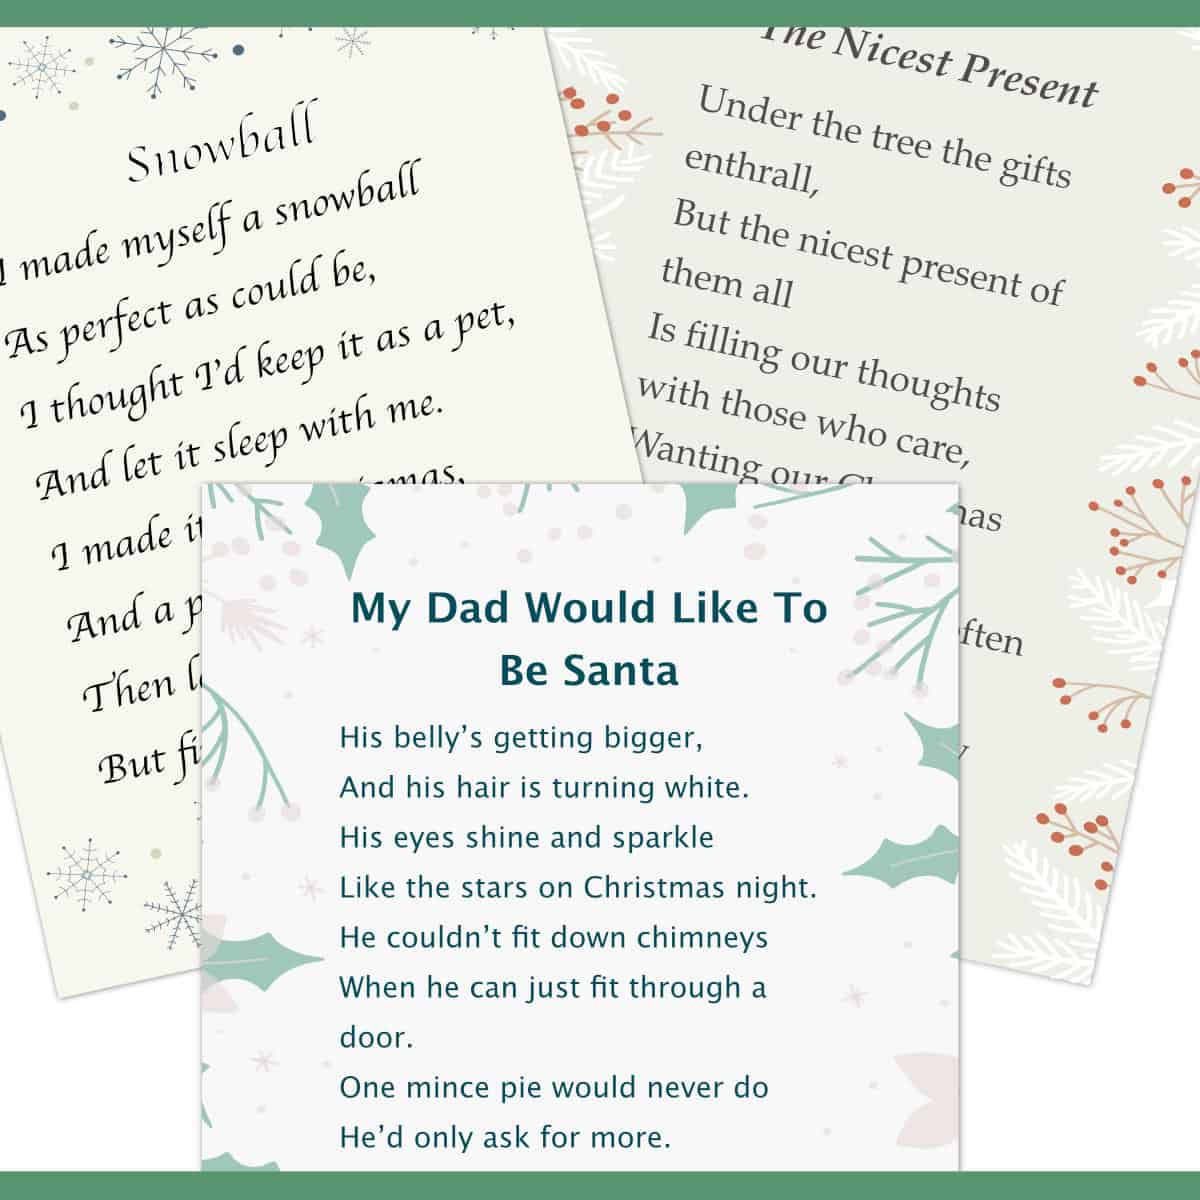 3 different poems for Christmas on paper.